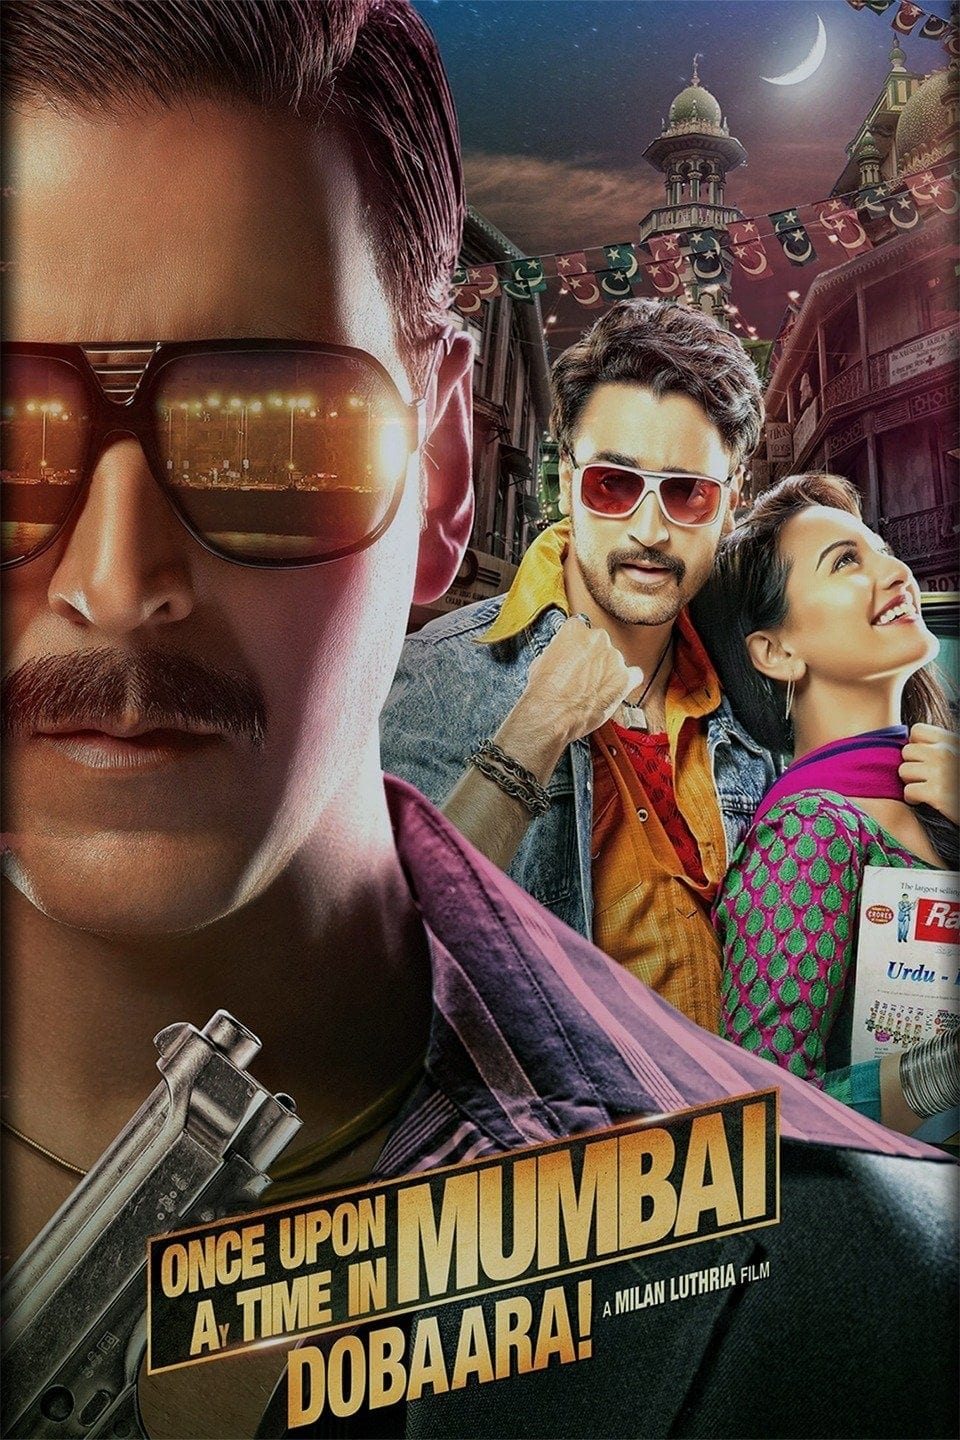 Poster for the movie "Once Upon ay Time in Mumbai Dobaara!"